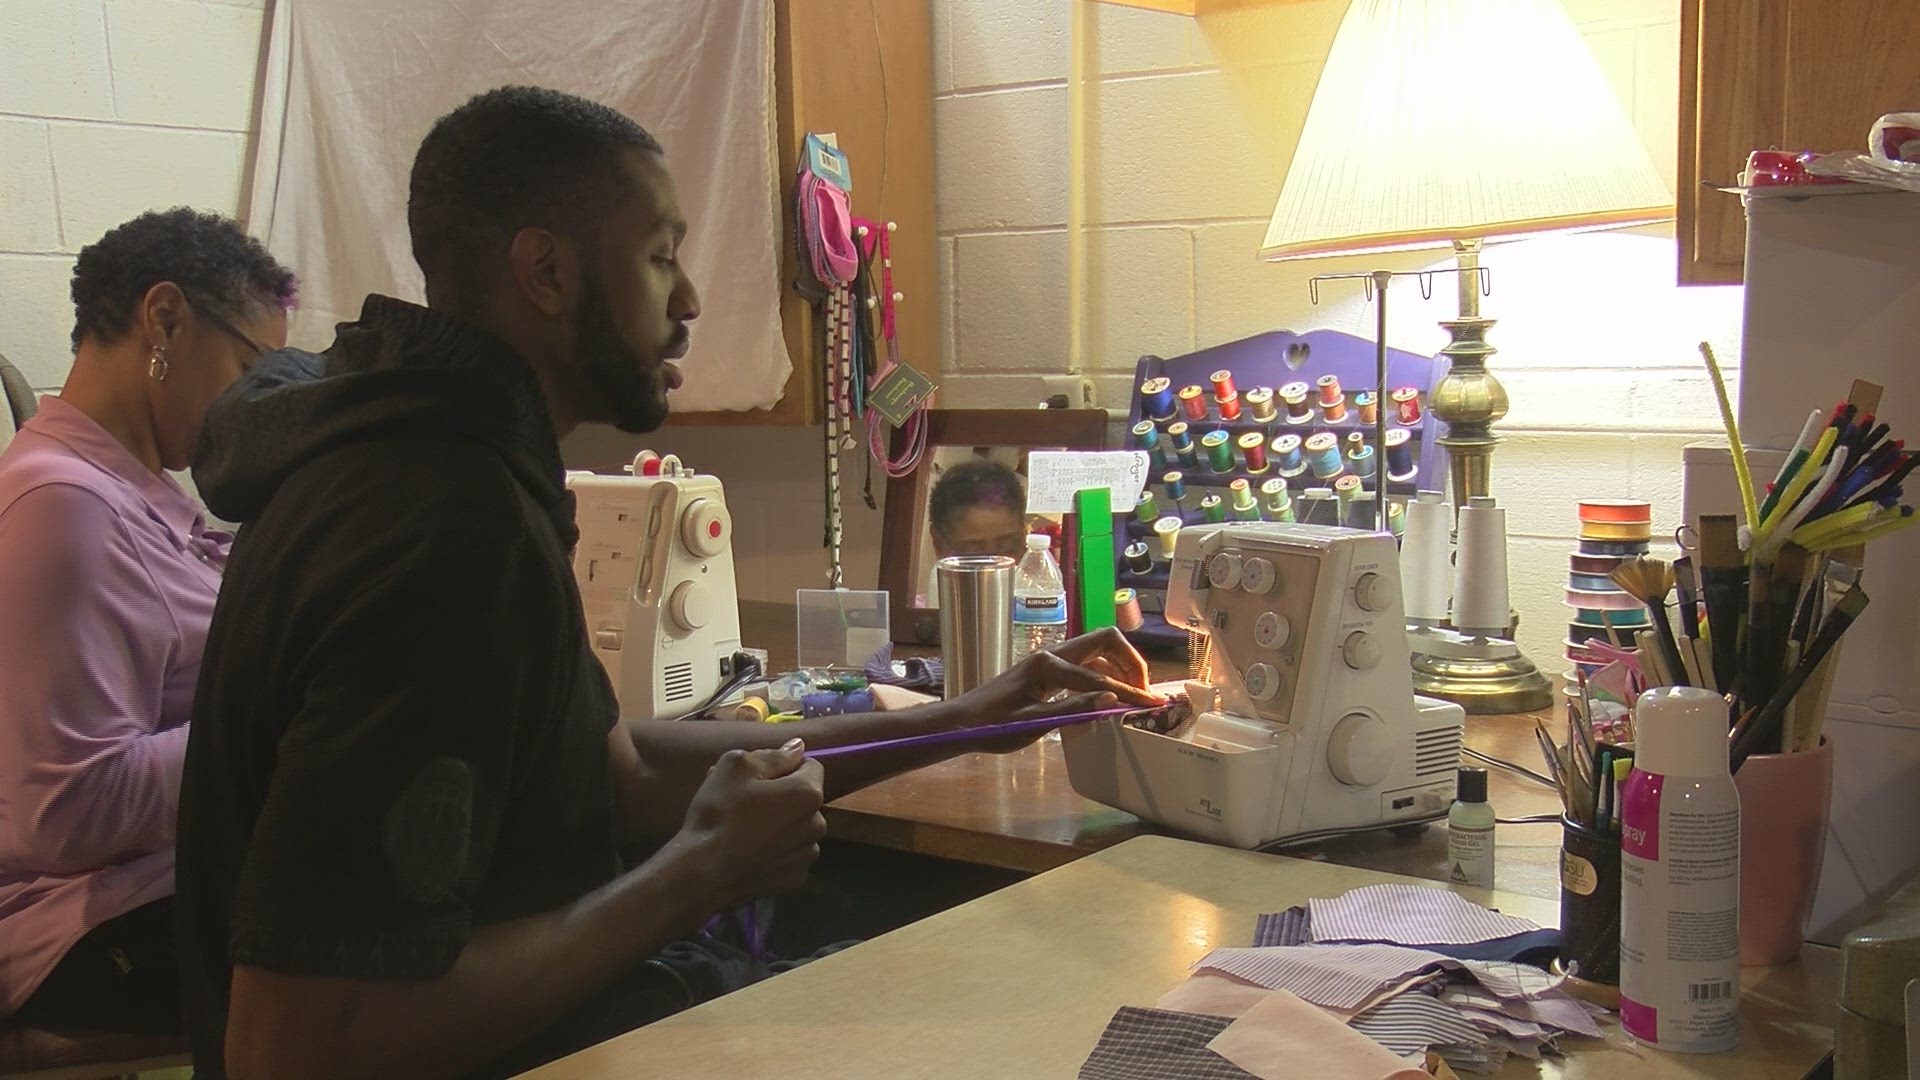 With his NBA G League season cut short, Bowling Green High School and Wisconsin grad Vitto Brown learned to sew. Helping his mom make face masks to combat COVID-19.